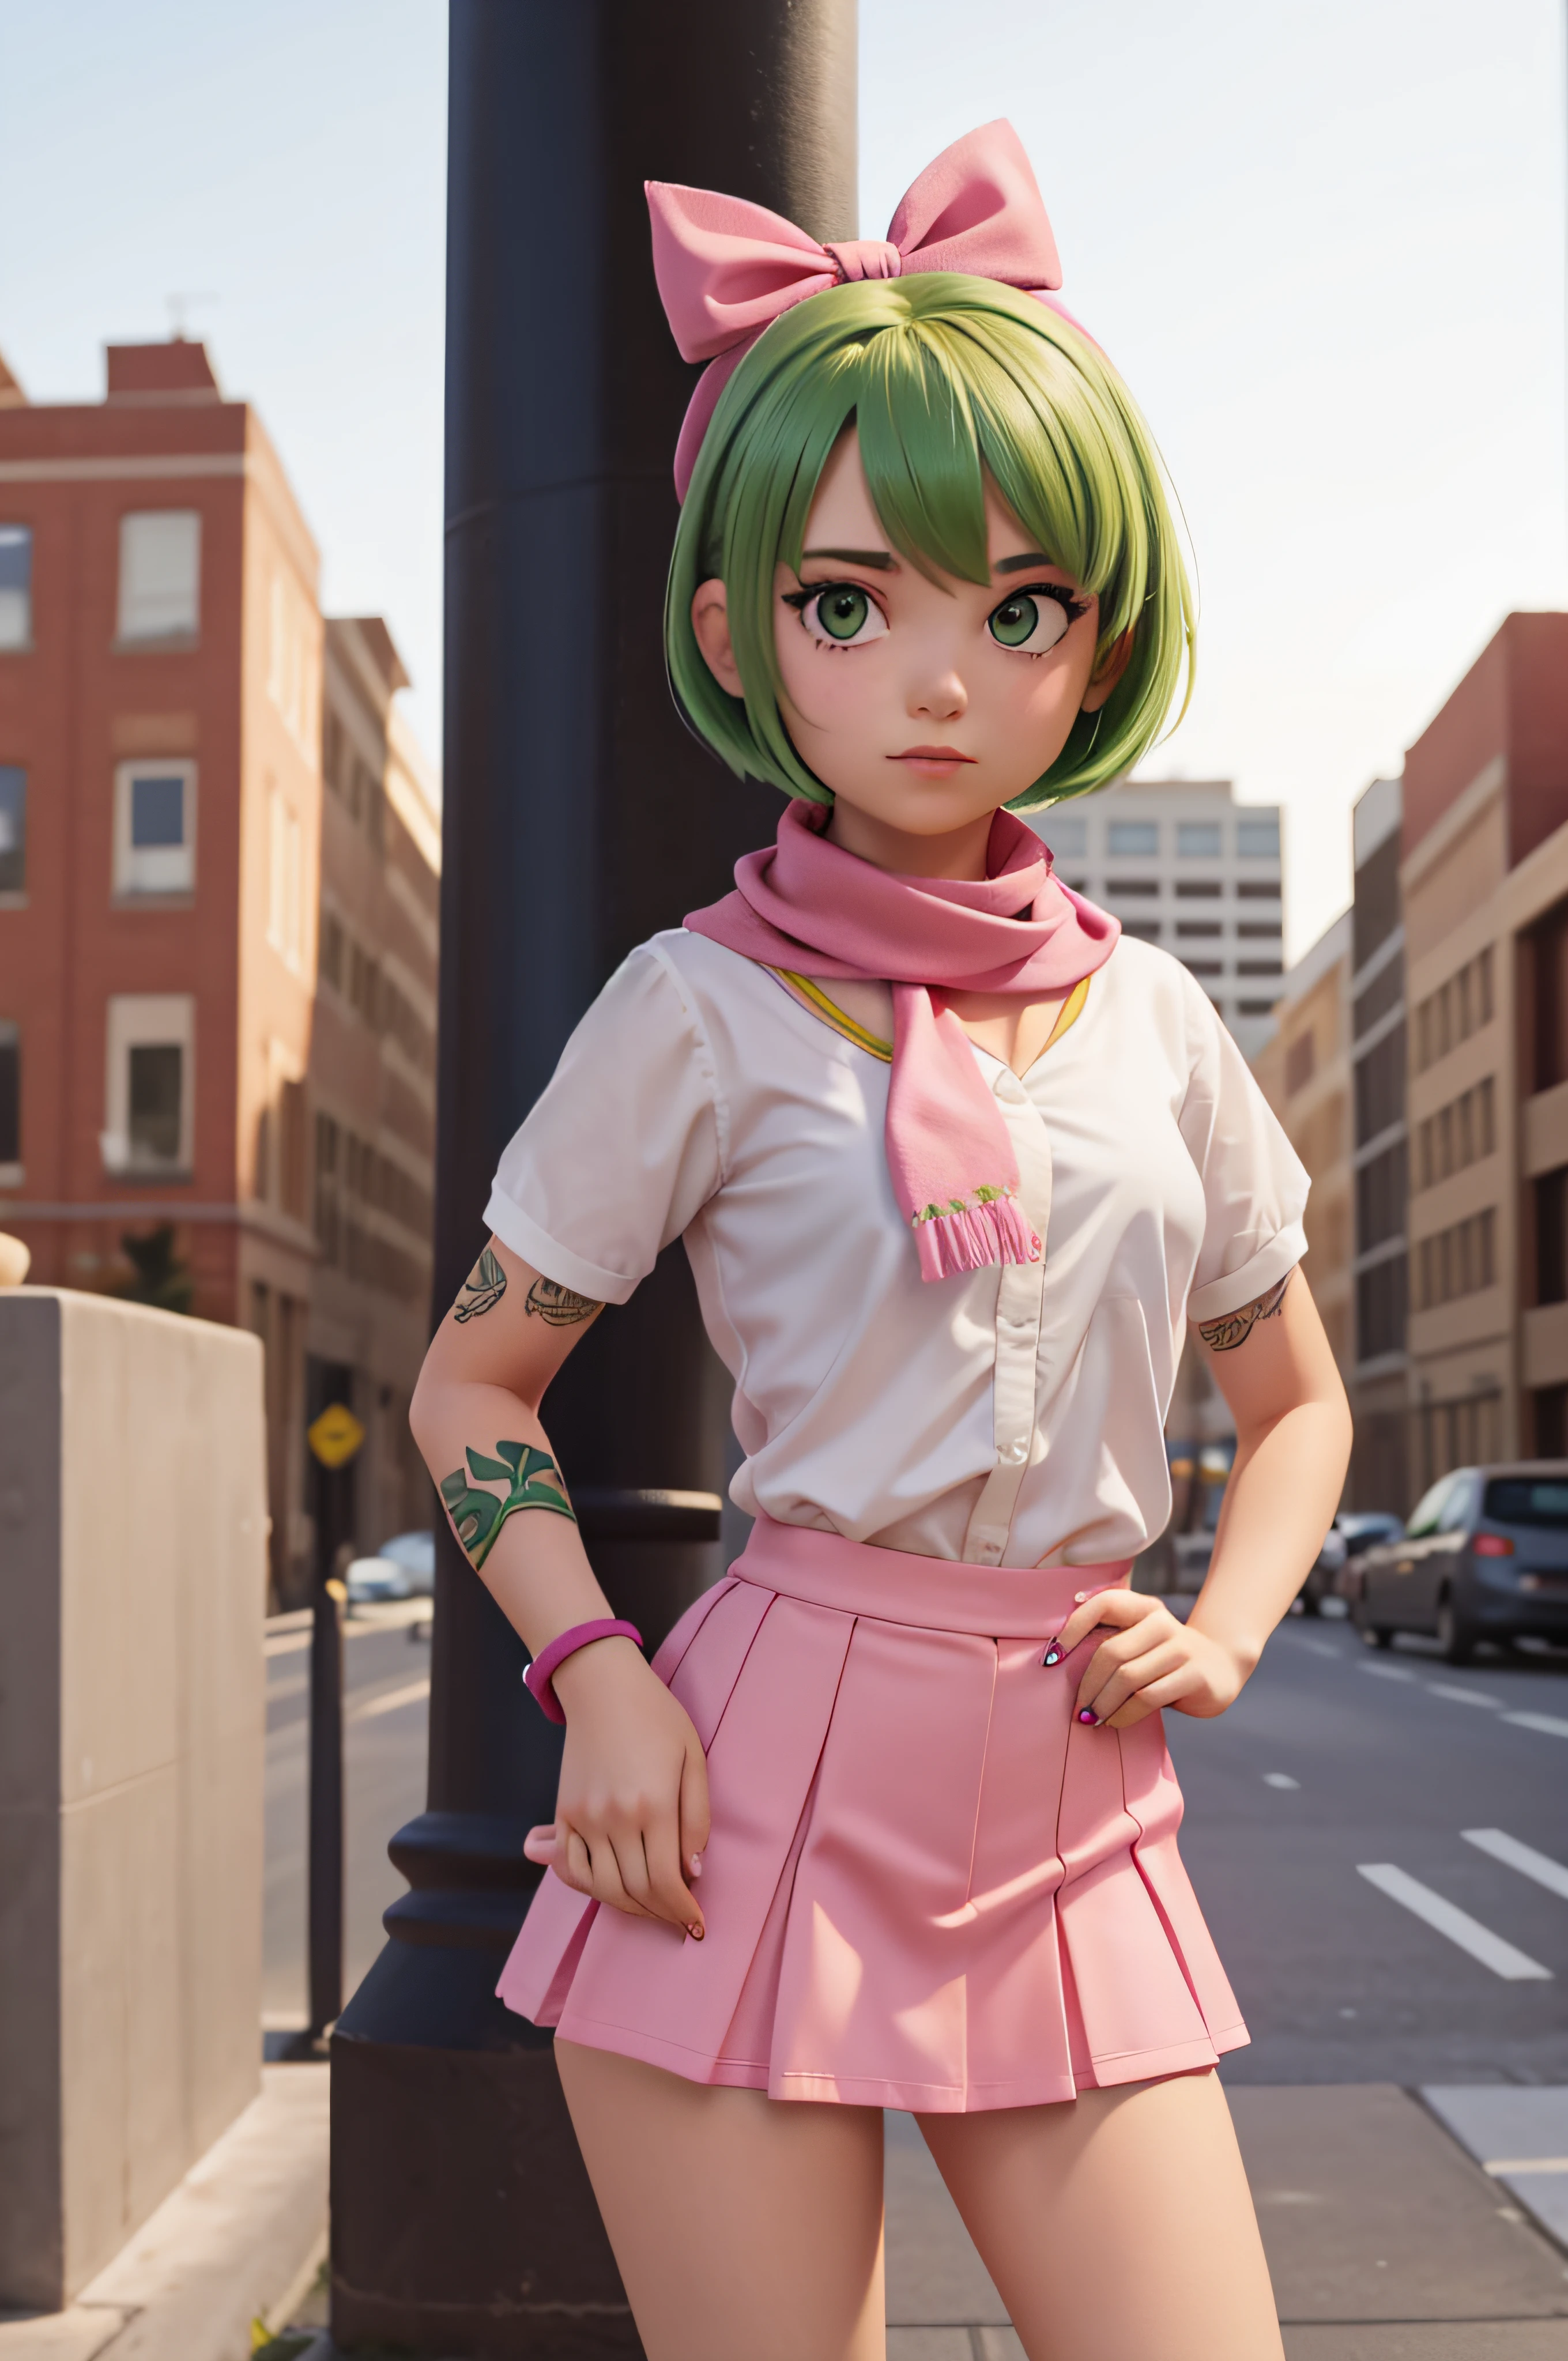 1 girl, 20 years old, short green hair, short shirt, pink mini skirt, colored ribbon in her hair, scarf around her neck, city, tattoo on her arm